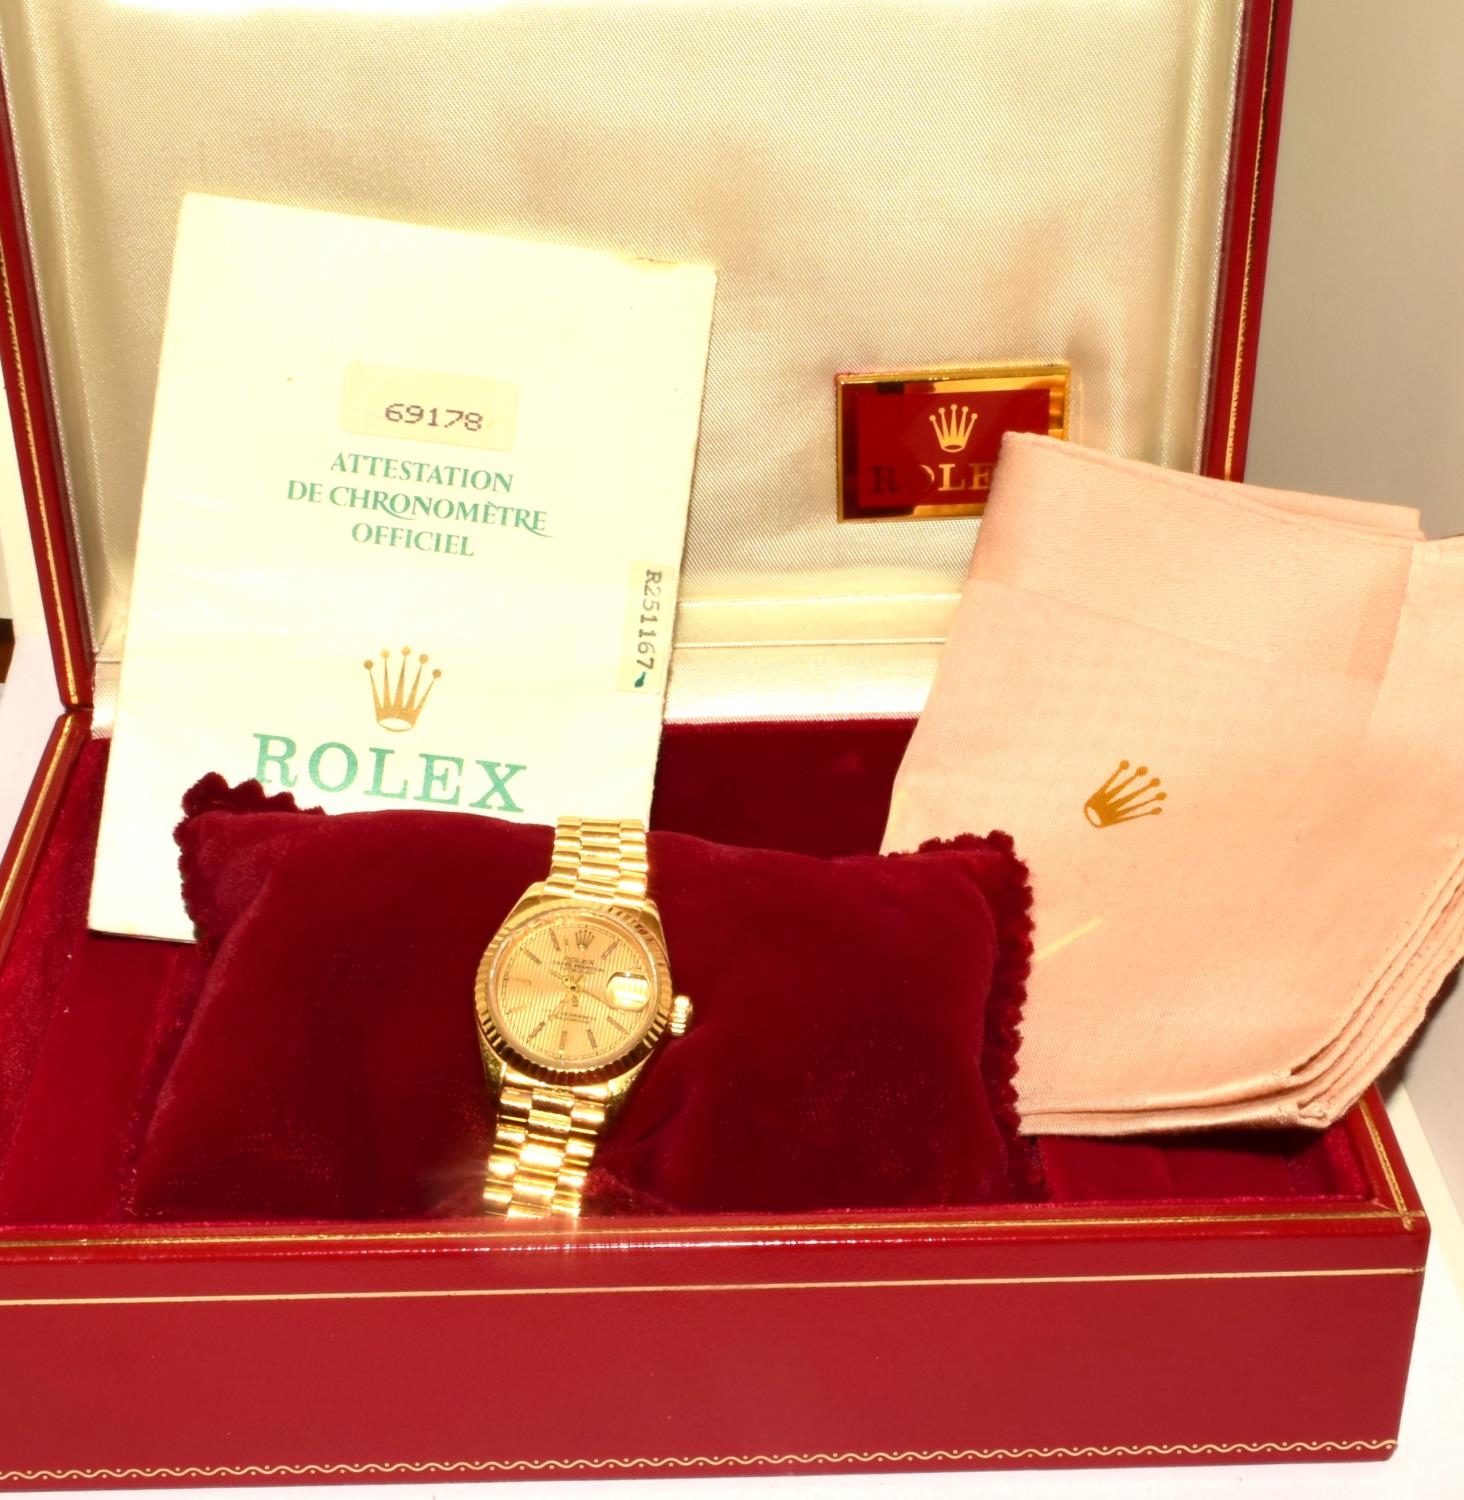 Rolex model 69178, 18ct gold purchased 1988 from watches of Switzerland, watch is not running. Comes